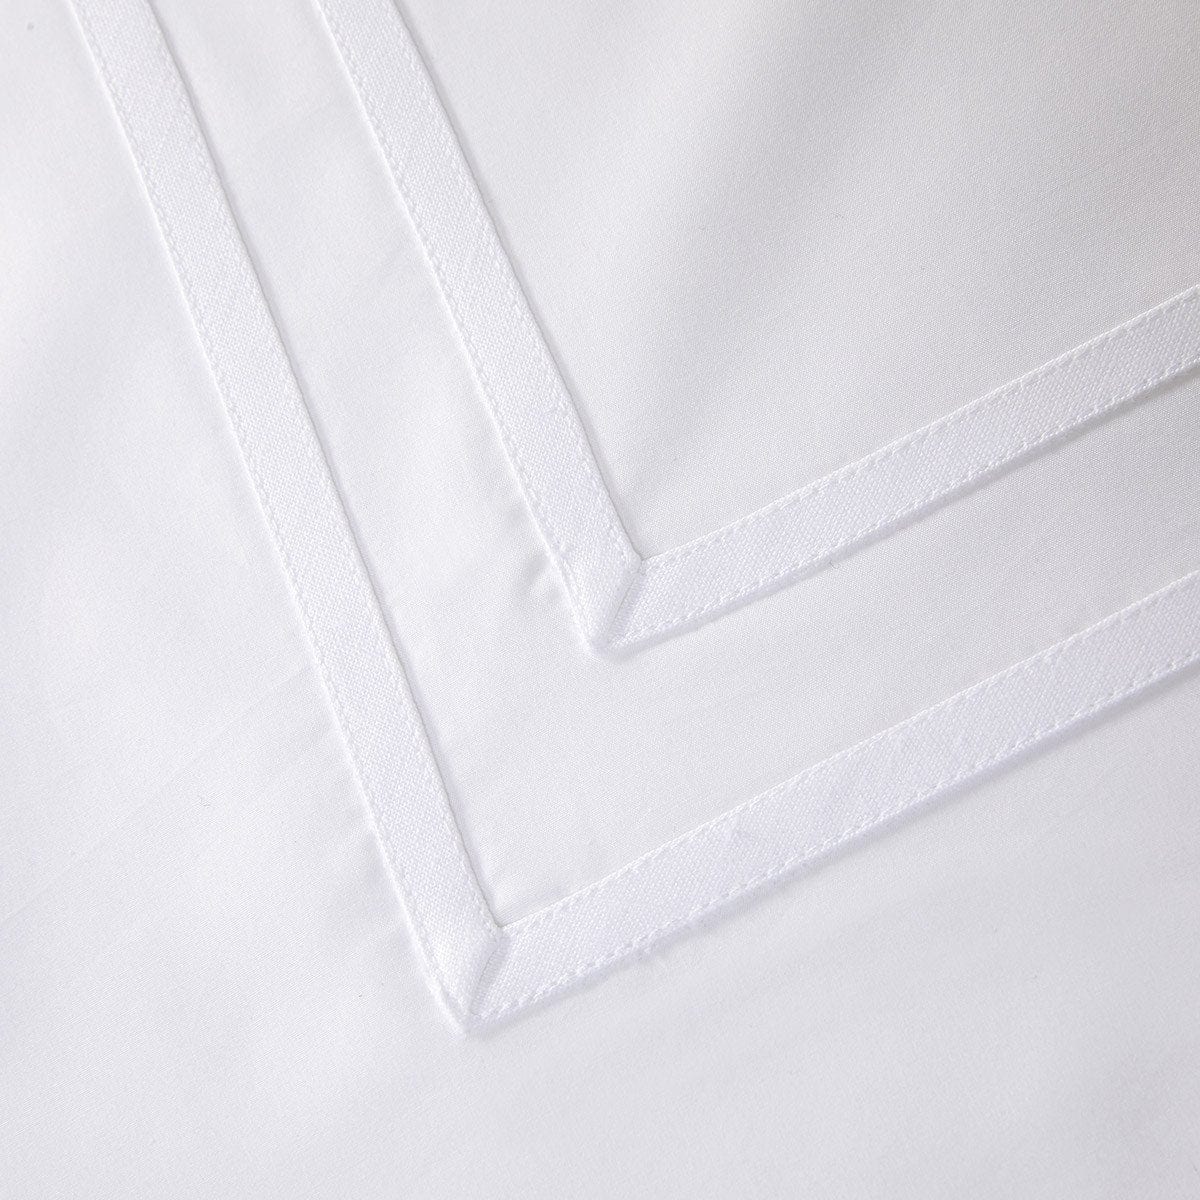 Fig Linens - Harmonie Blanc Bedding by Yves Delorme - Detail